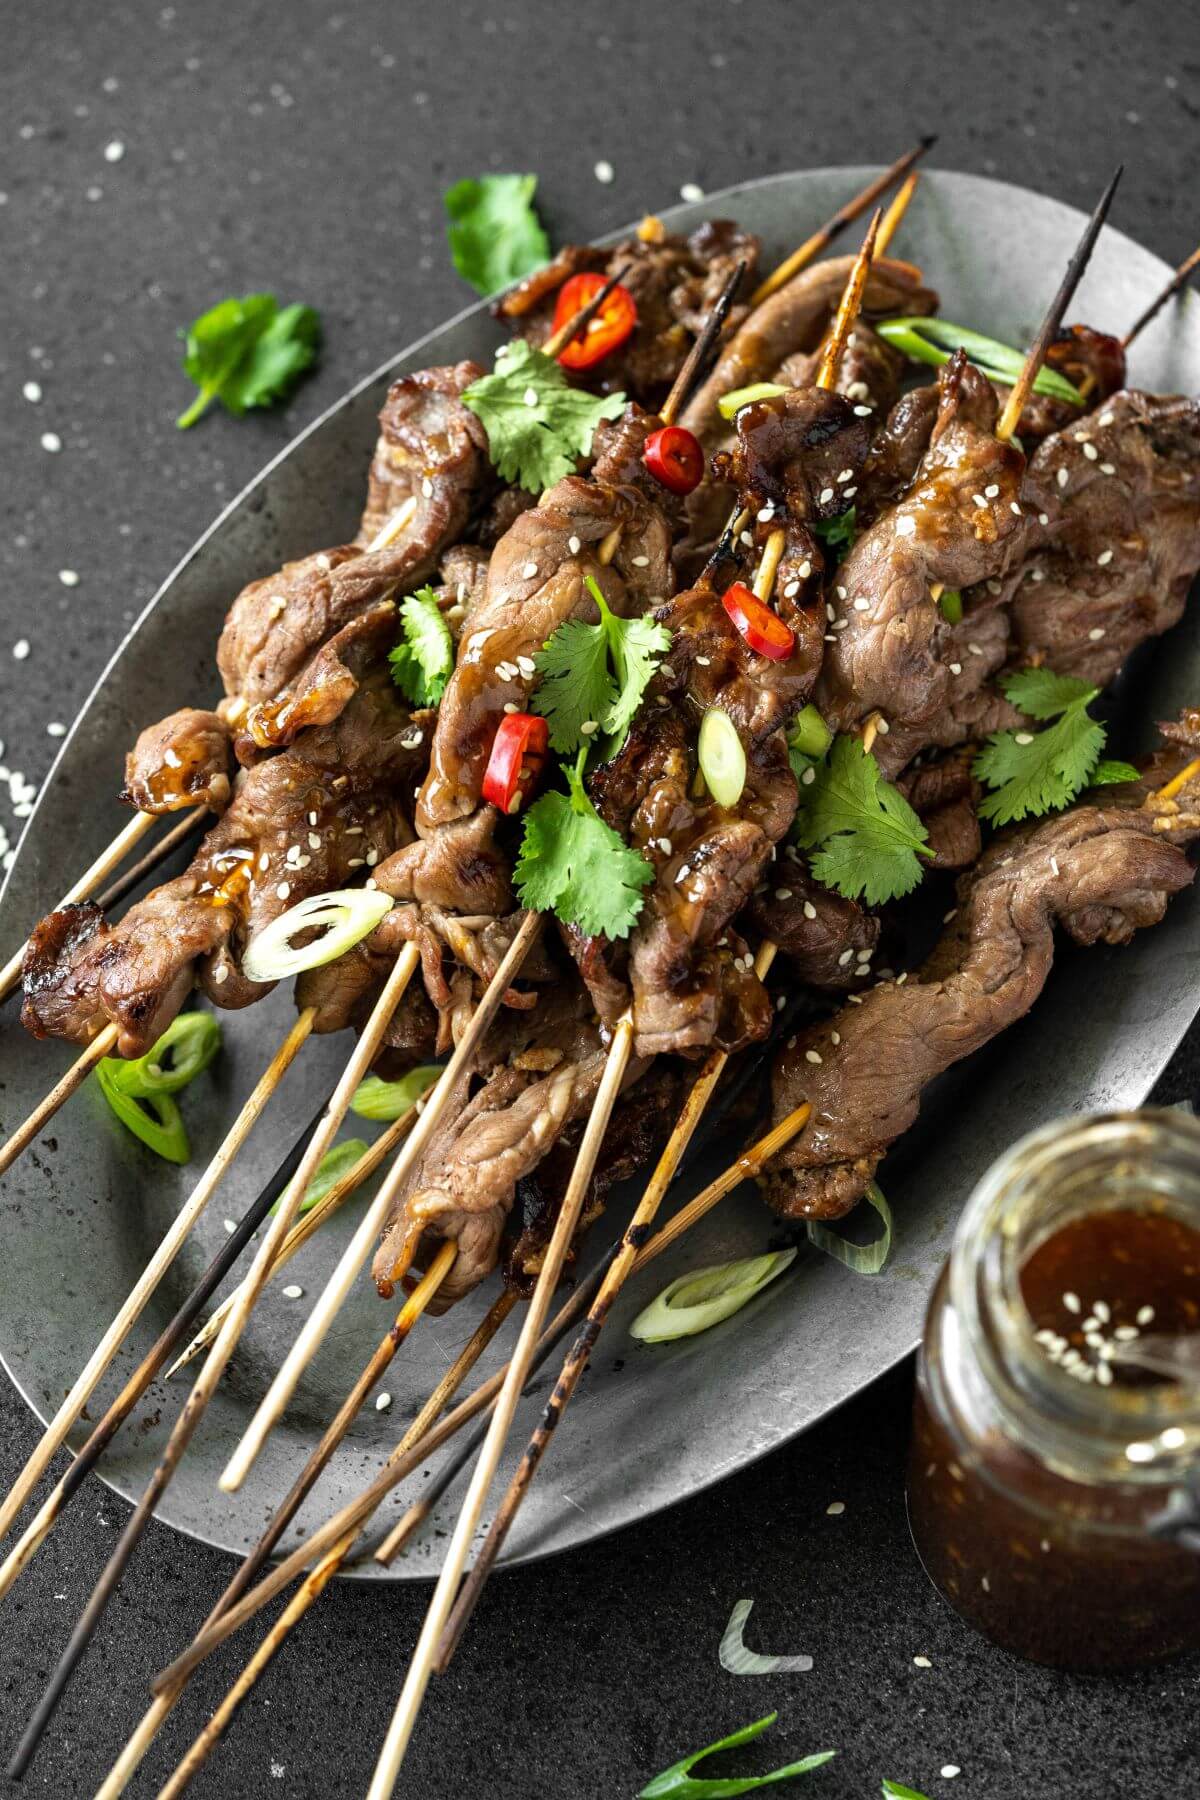 A platter of grilled Teriyaki Beef Sticks garnished with chopped green herbs and red hot peppers.